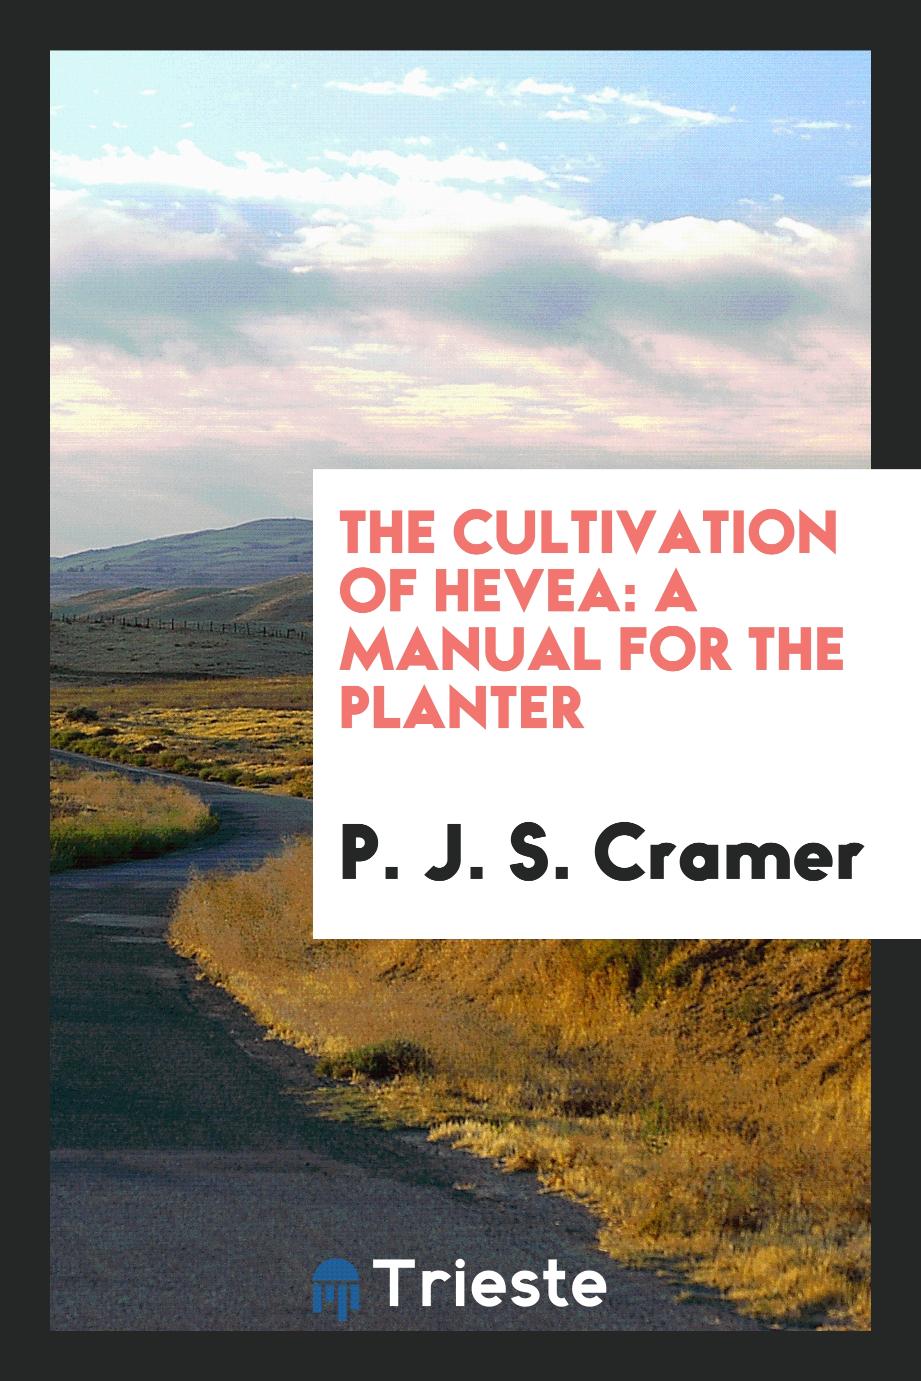 The cultivation of Hevea: a manual for the planter